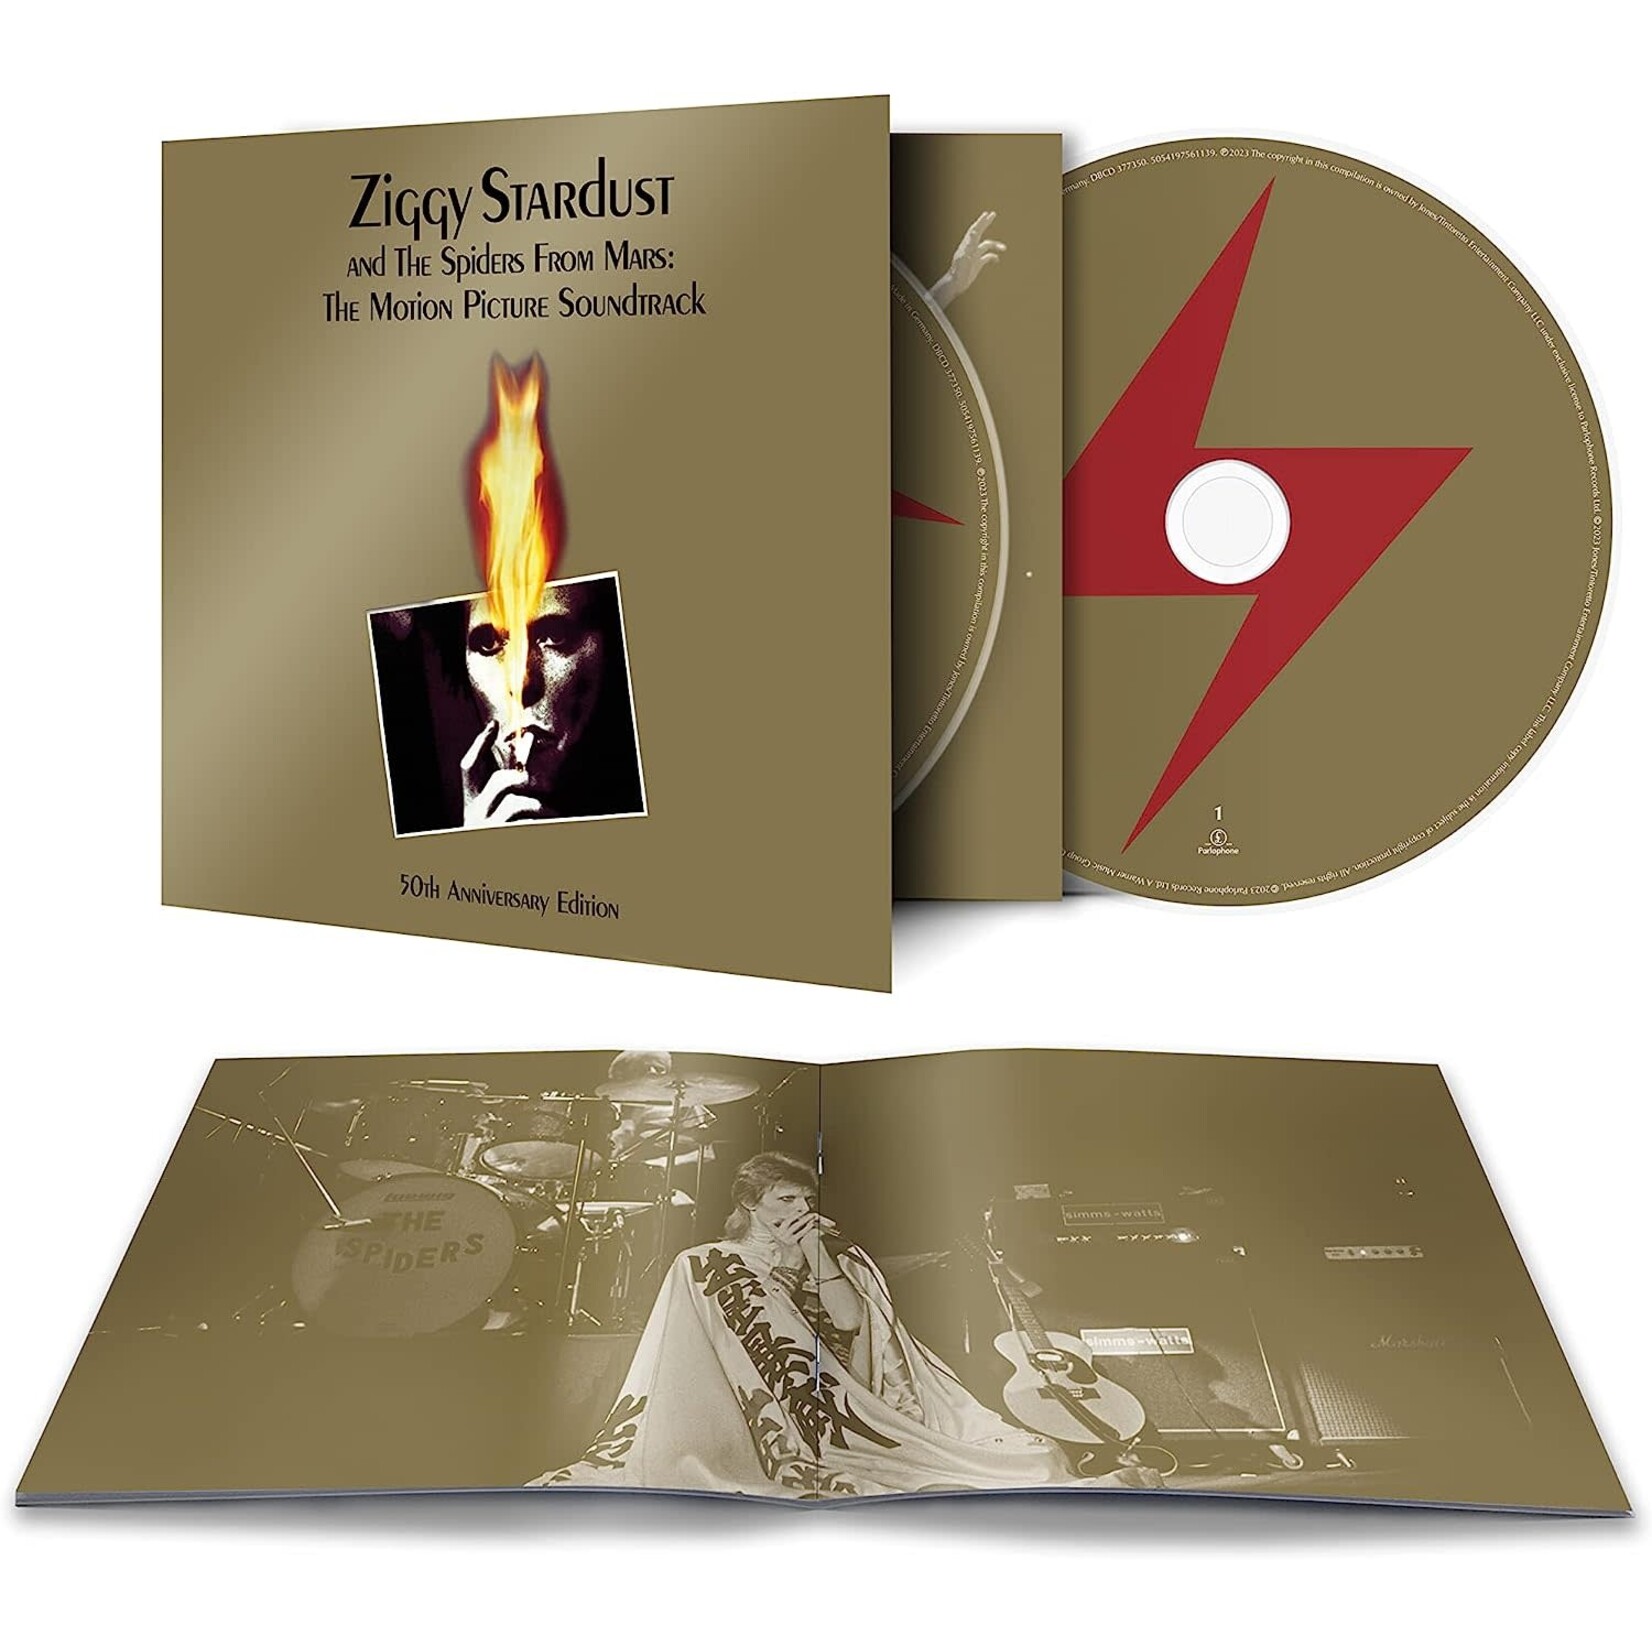 David Bowie - Ziggy Stardust And The Spiders From Mars: The Motion Picture Soundtrack (50th Ann Ed) [2CD]